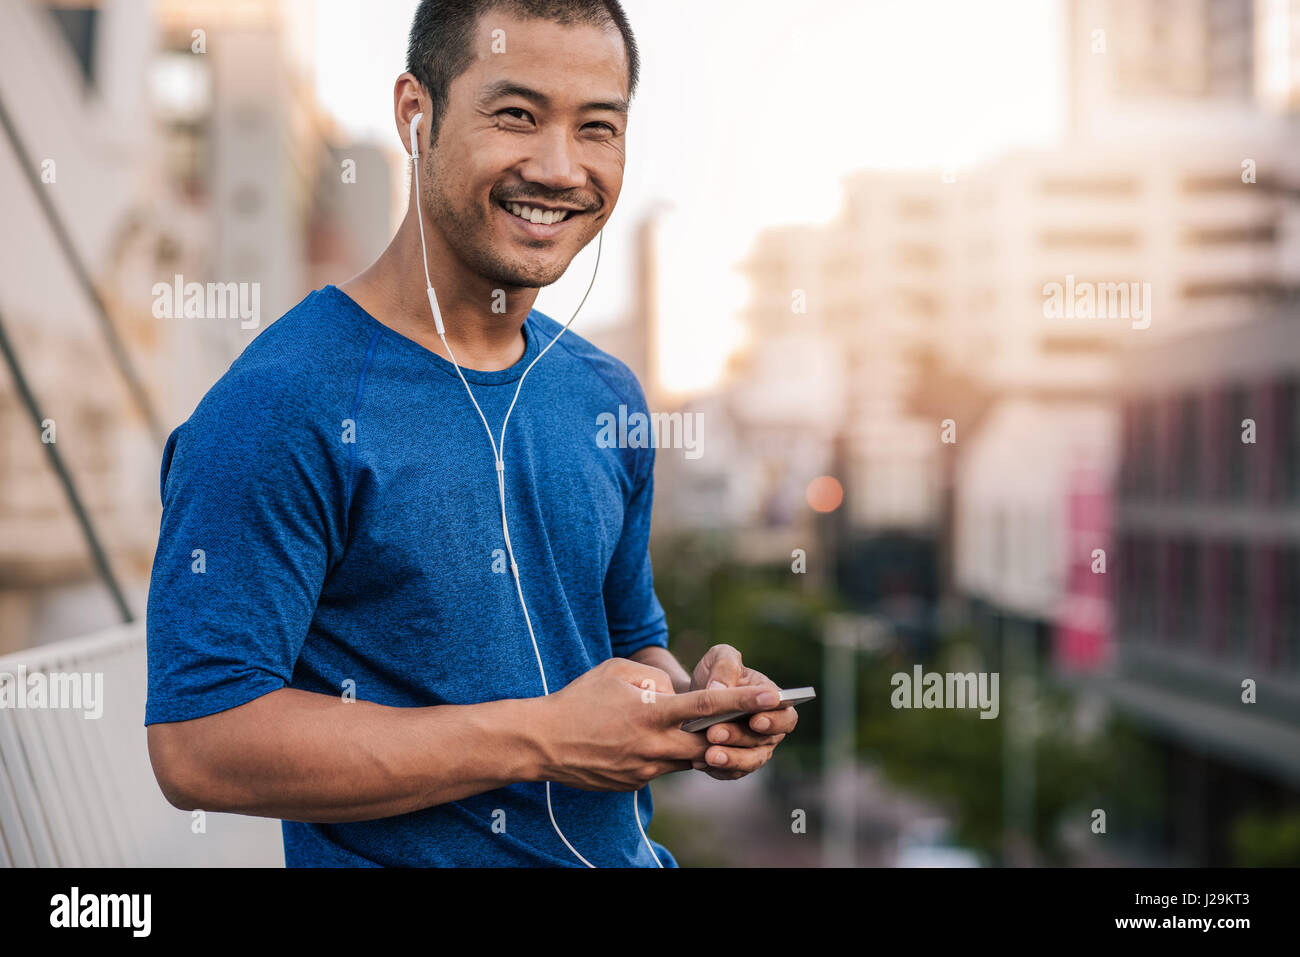 Smiling Asian man preparing a playlist for a city run Stock Photo